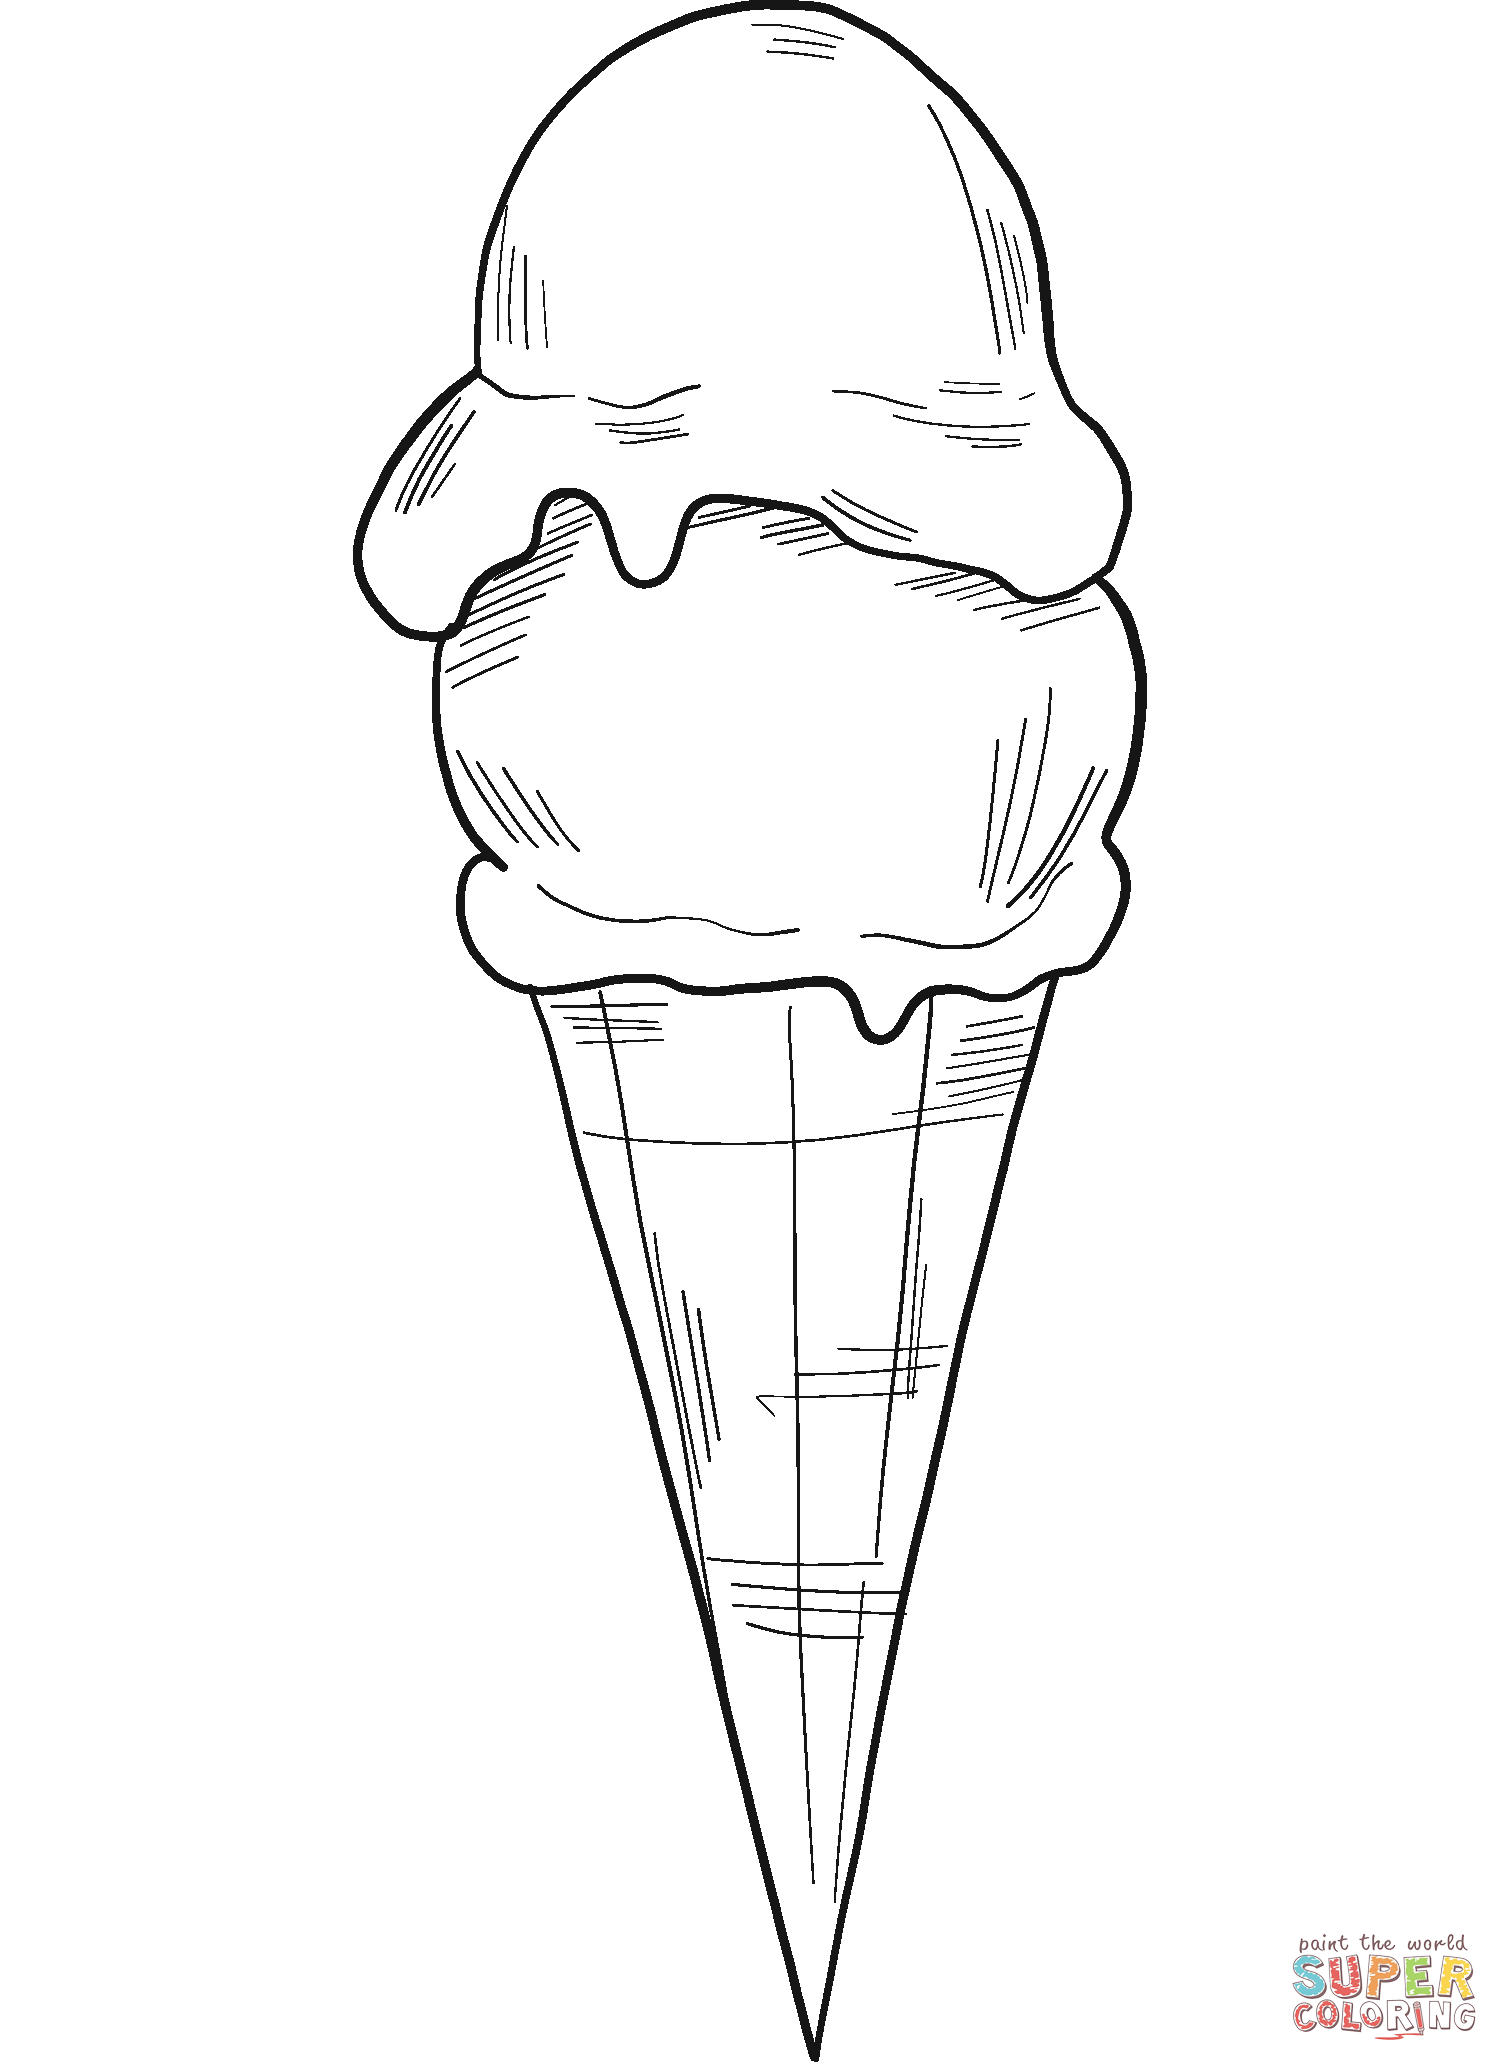 Ice cream cone coloring page free printable coloring pages